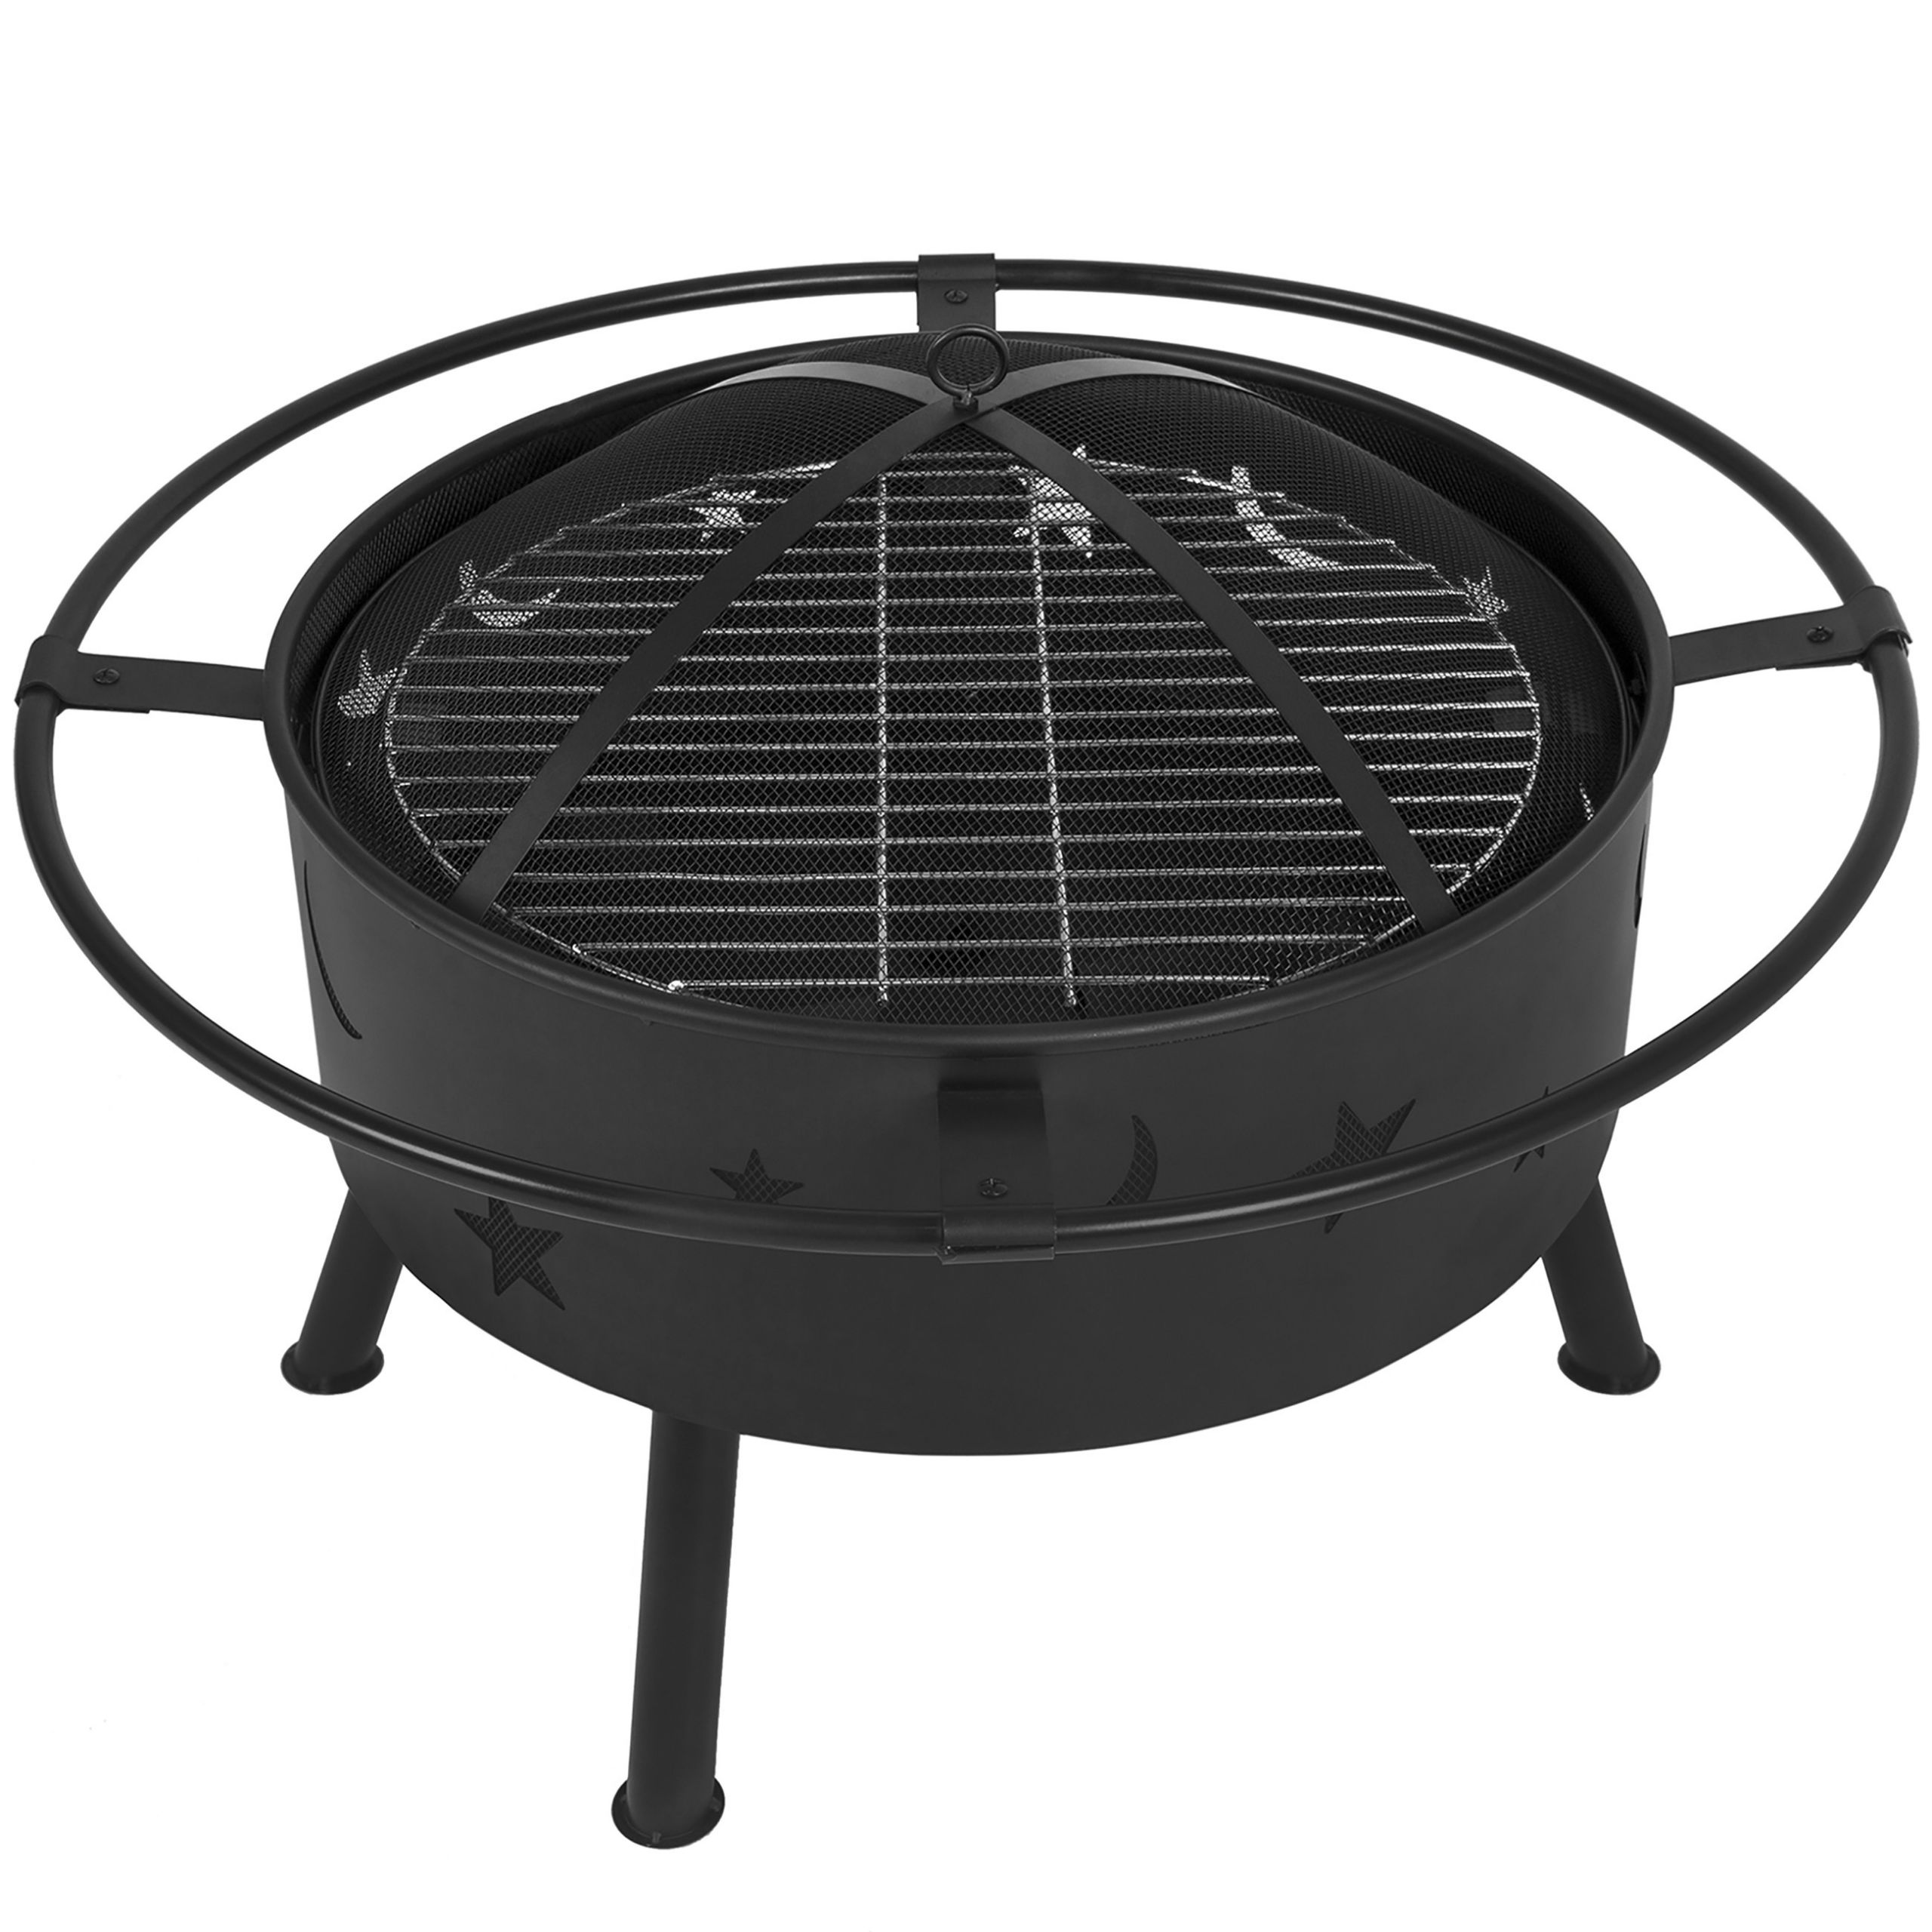 Firepit And Grill
 Best Choice Products 30" Fire Pit BBQ Grill FireBowl Patio